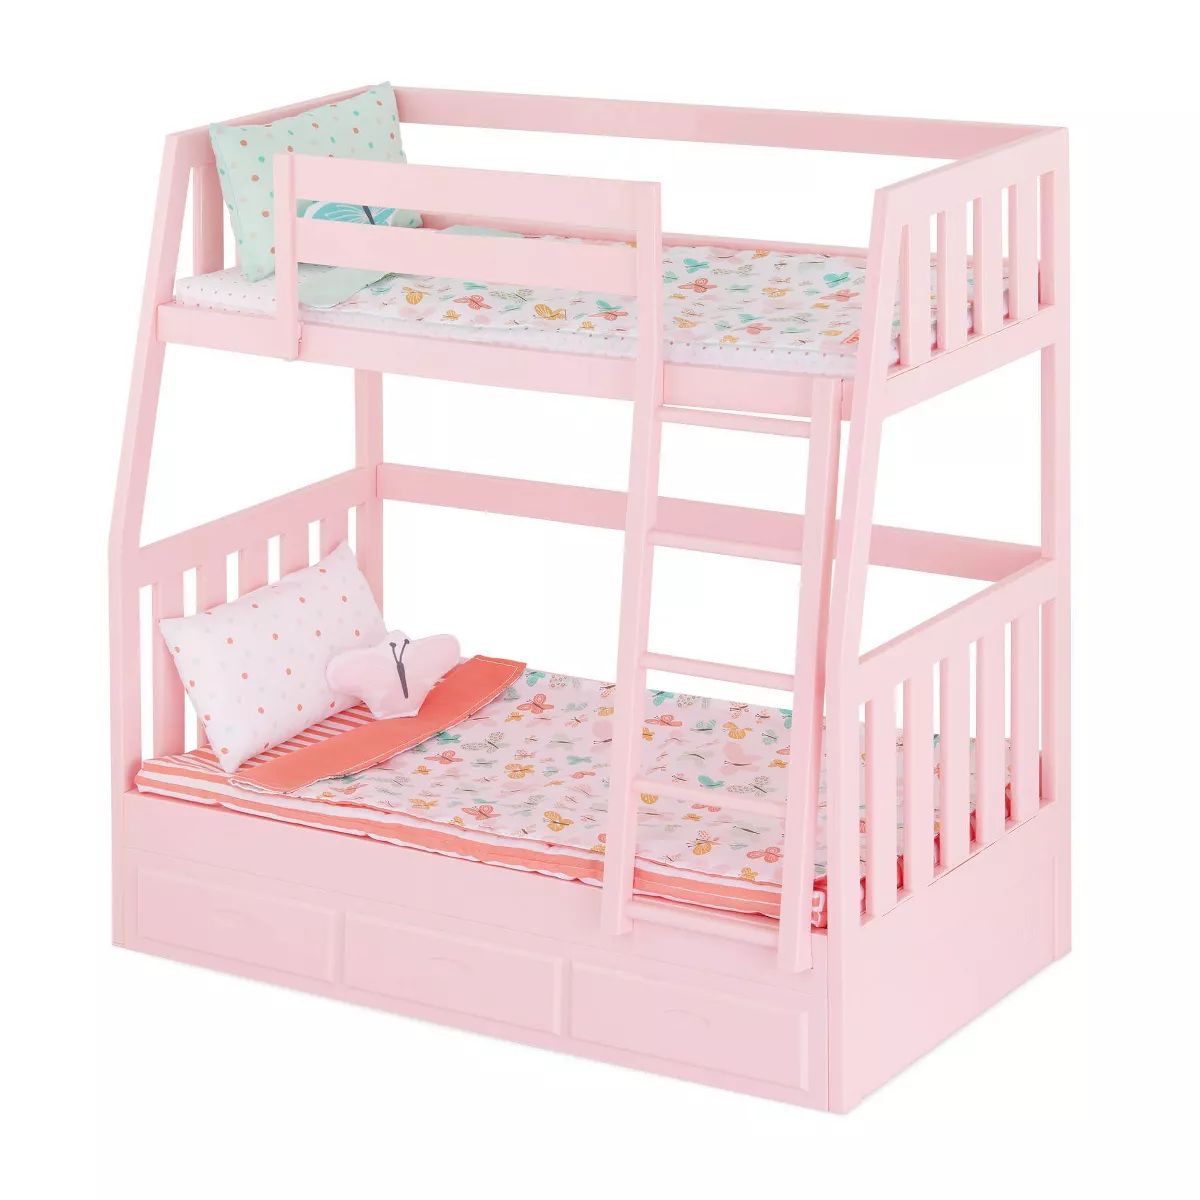 Our Generation Dreams for Two Pink Bunk Beds Accessory Set for 18" Dolls | Target